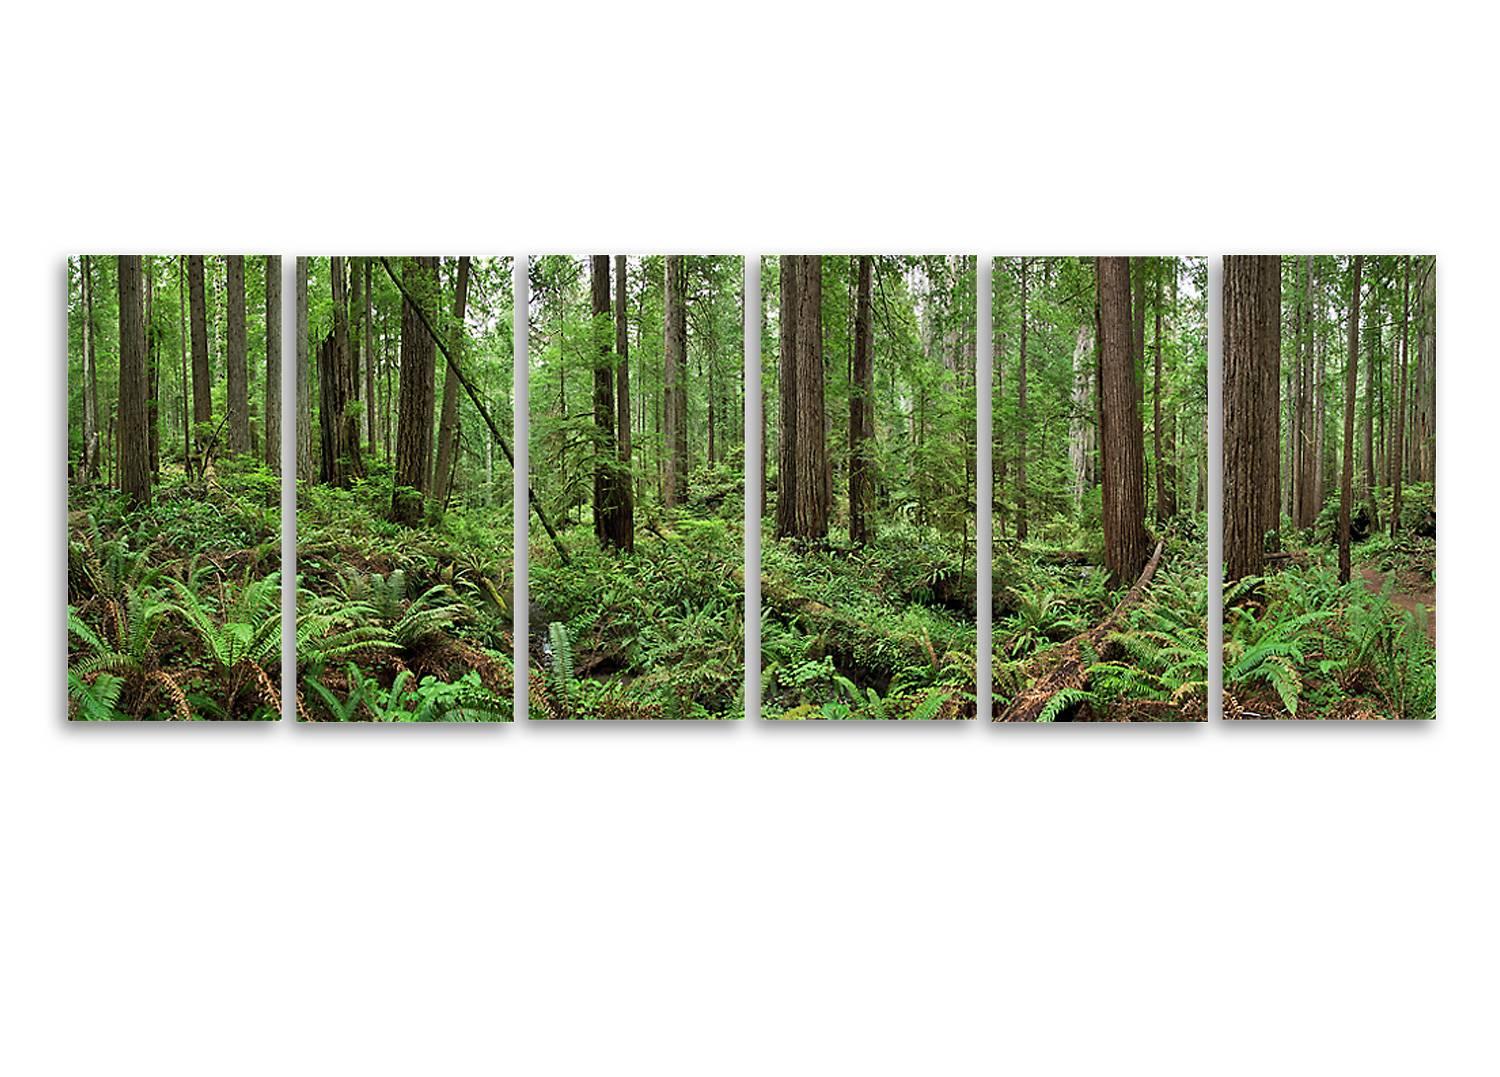 Redwoods - large format nature observation in six individual photograph 